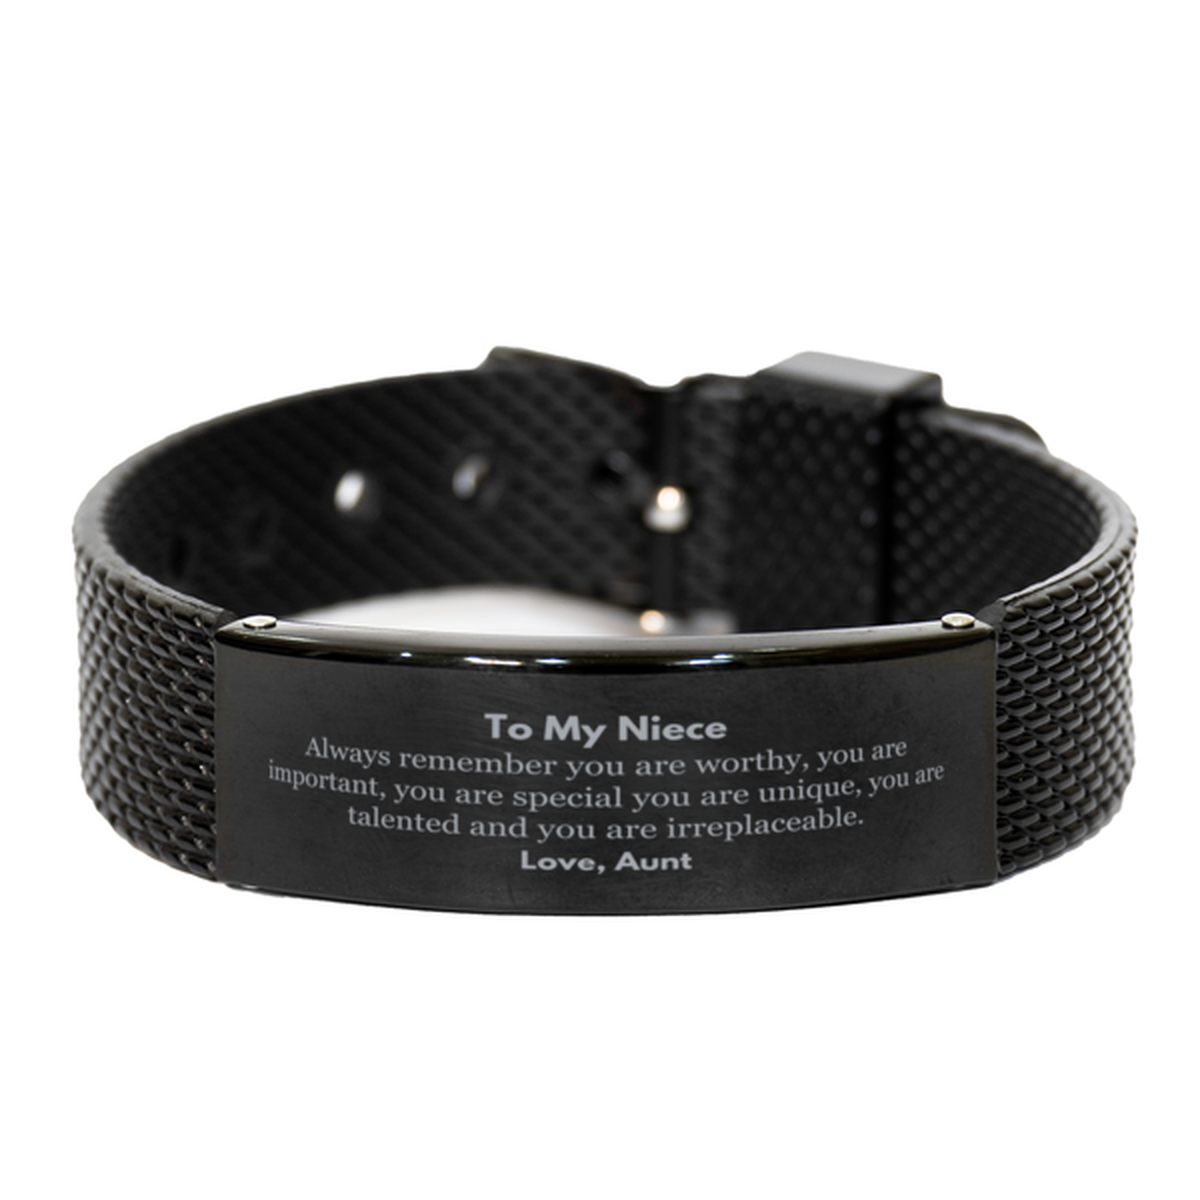 Niece Birthday Gifts from Aunt, Inspirational Black Shark Mesh Bracelet for Niece Christmas Graduation Gifts for Niece Always remember you are worthy, you are important. Love, Aunt